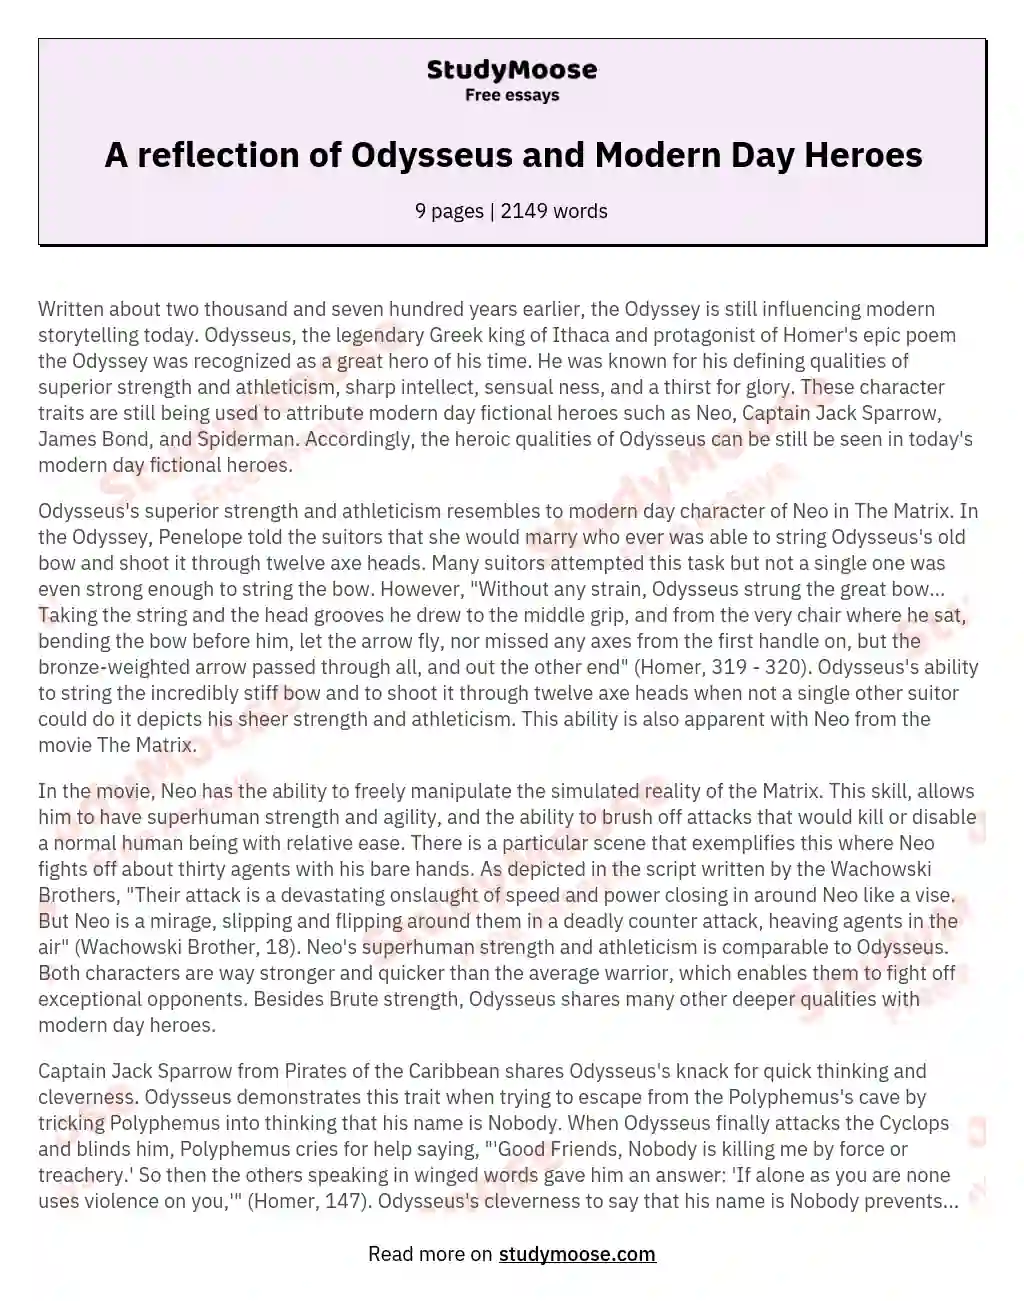 A reflection of Odysseus and Modern Day Heroes